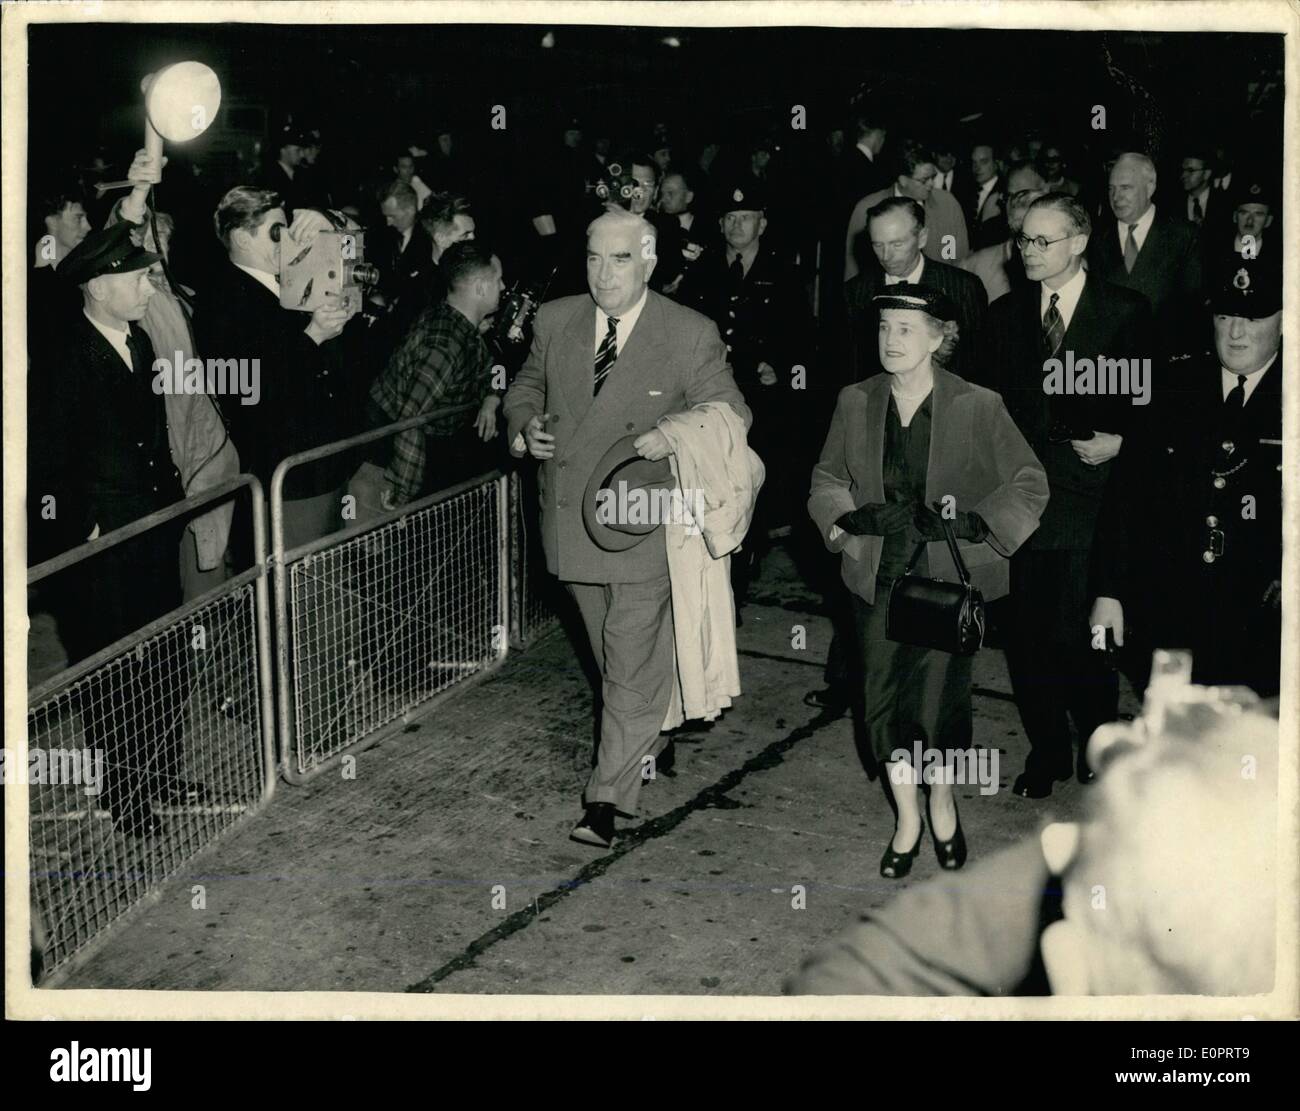 Nov. 11, 1956 - 11-9-56 Mr. Menzies arrrives at London airport. Walking from the aircraft. Mr. Menzies arrived at London Airport this evening at the end of his talks with Colonel Nasser in Cairo on the Suez situation. Keystone Photo Shows: Mr. Menzies and his wife make their way from the aircraft on arrival at London Airport this evening. Stock Photo